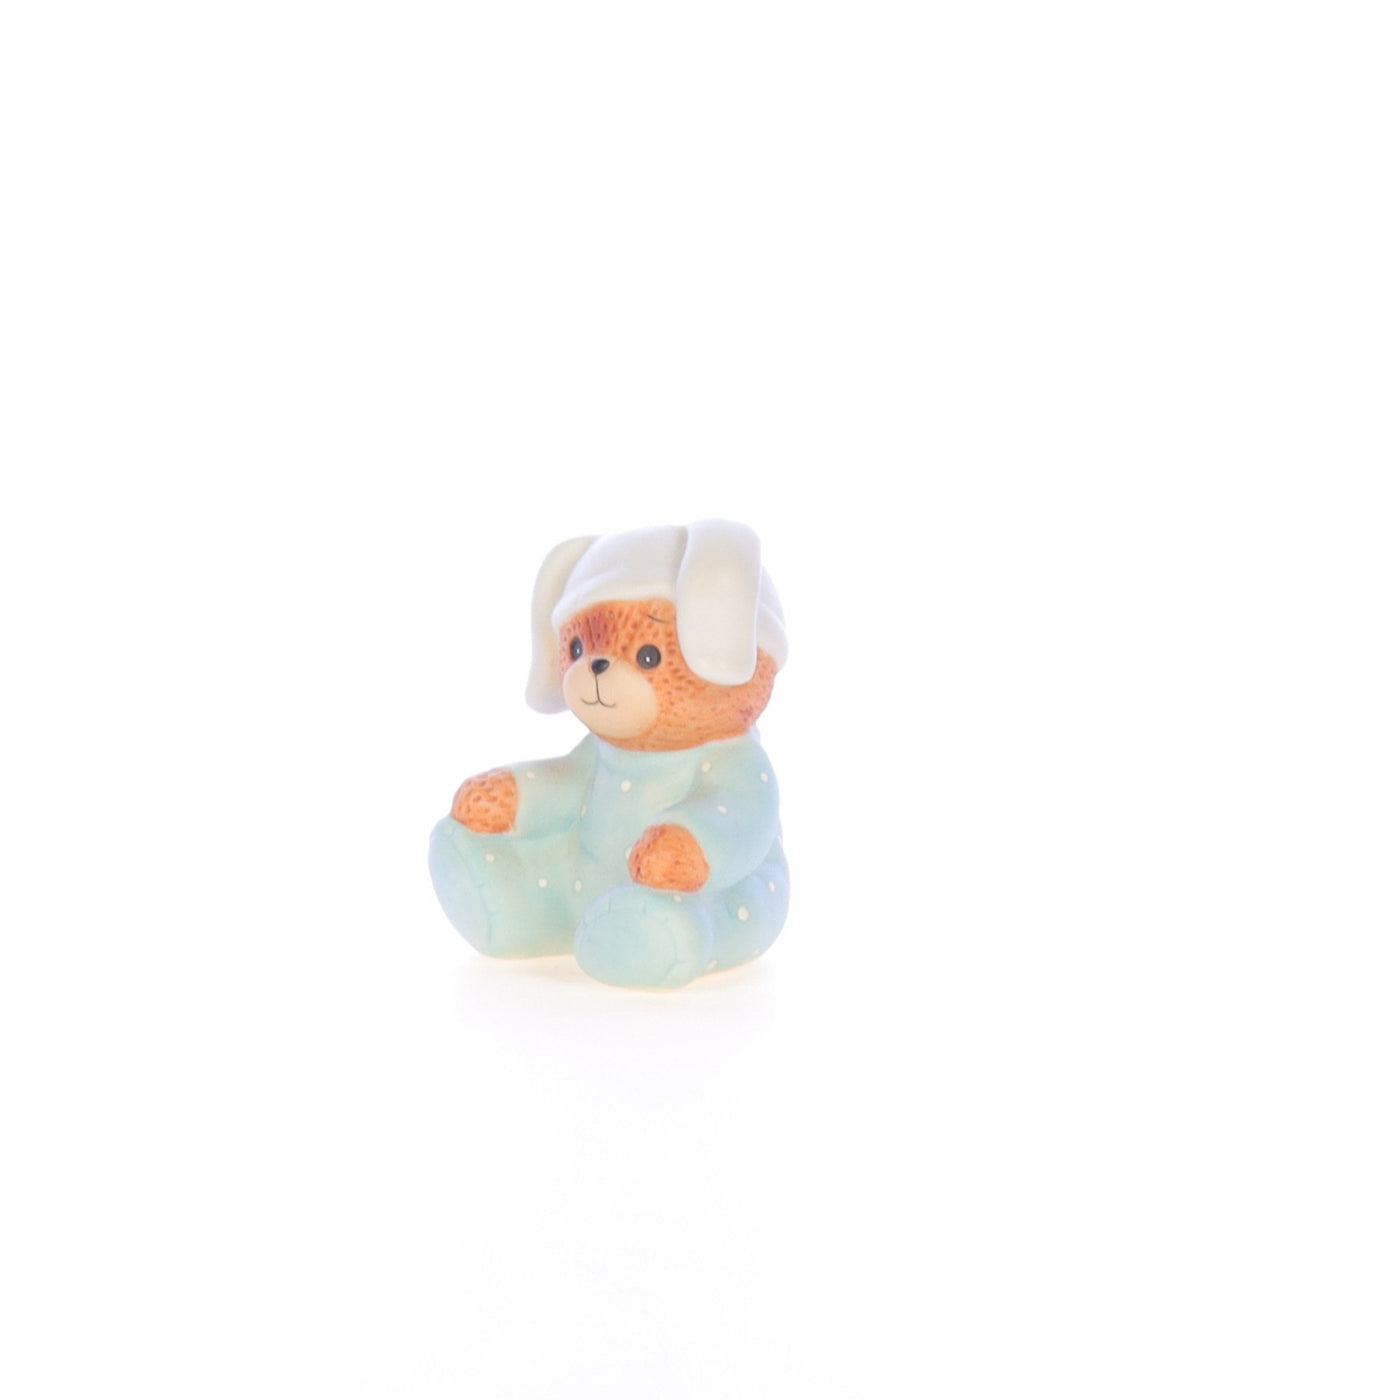 Lucy_And_Me_by_Lucy_Atwell_Porcelain_Figurine_Bear_with_Rabbit_Night_Cap_Lucy_Unknown_035_02